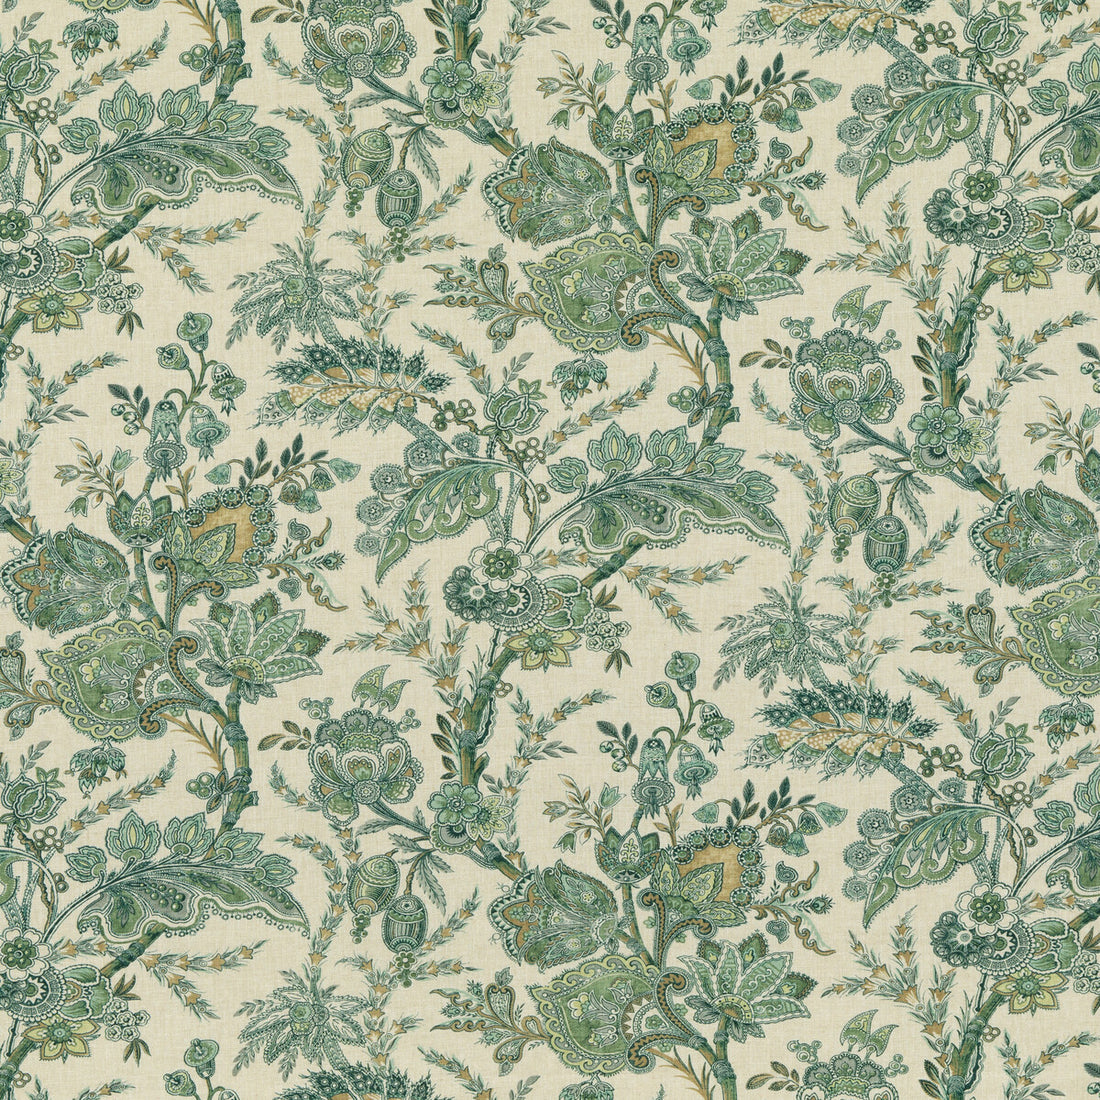 Jewel Indienne fabric in emerald color - pattern BP10830.3.0 - by G P &amp; J Baker in the Coromandel collection